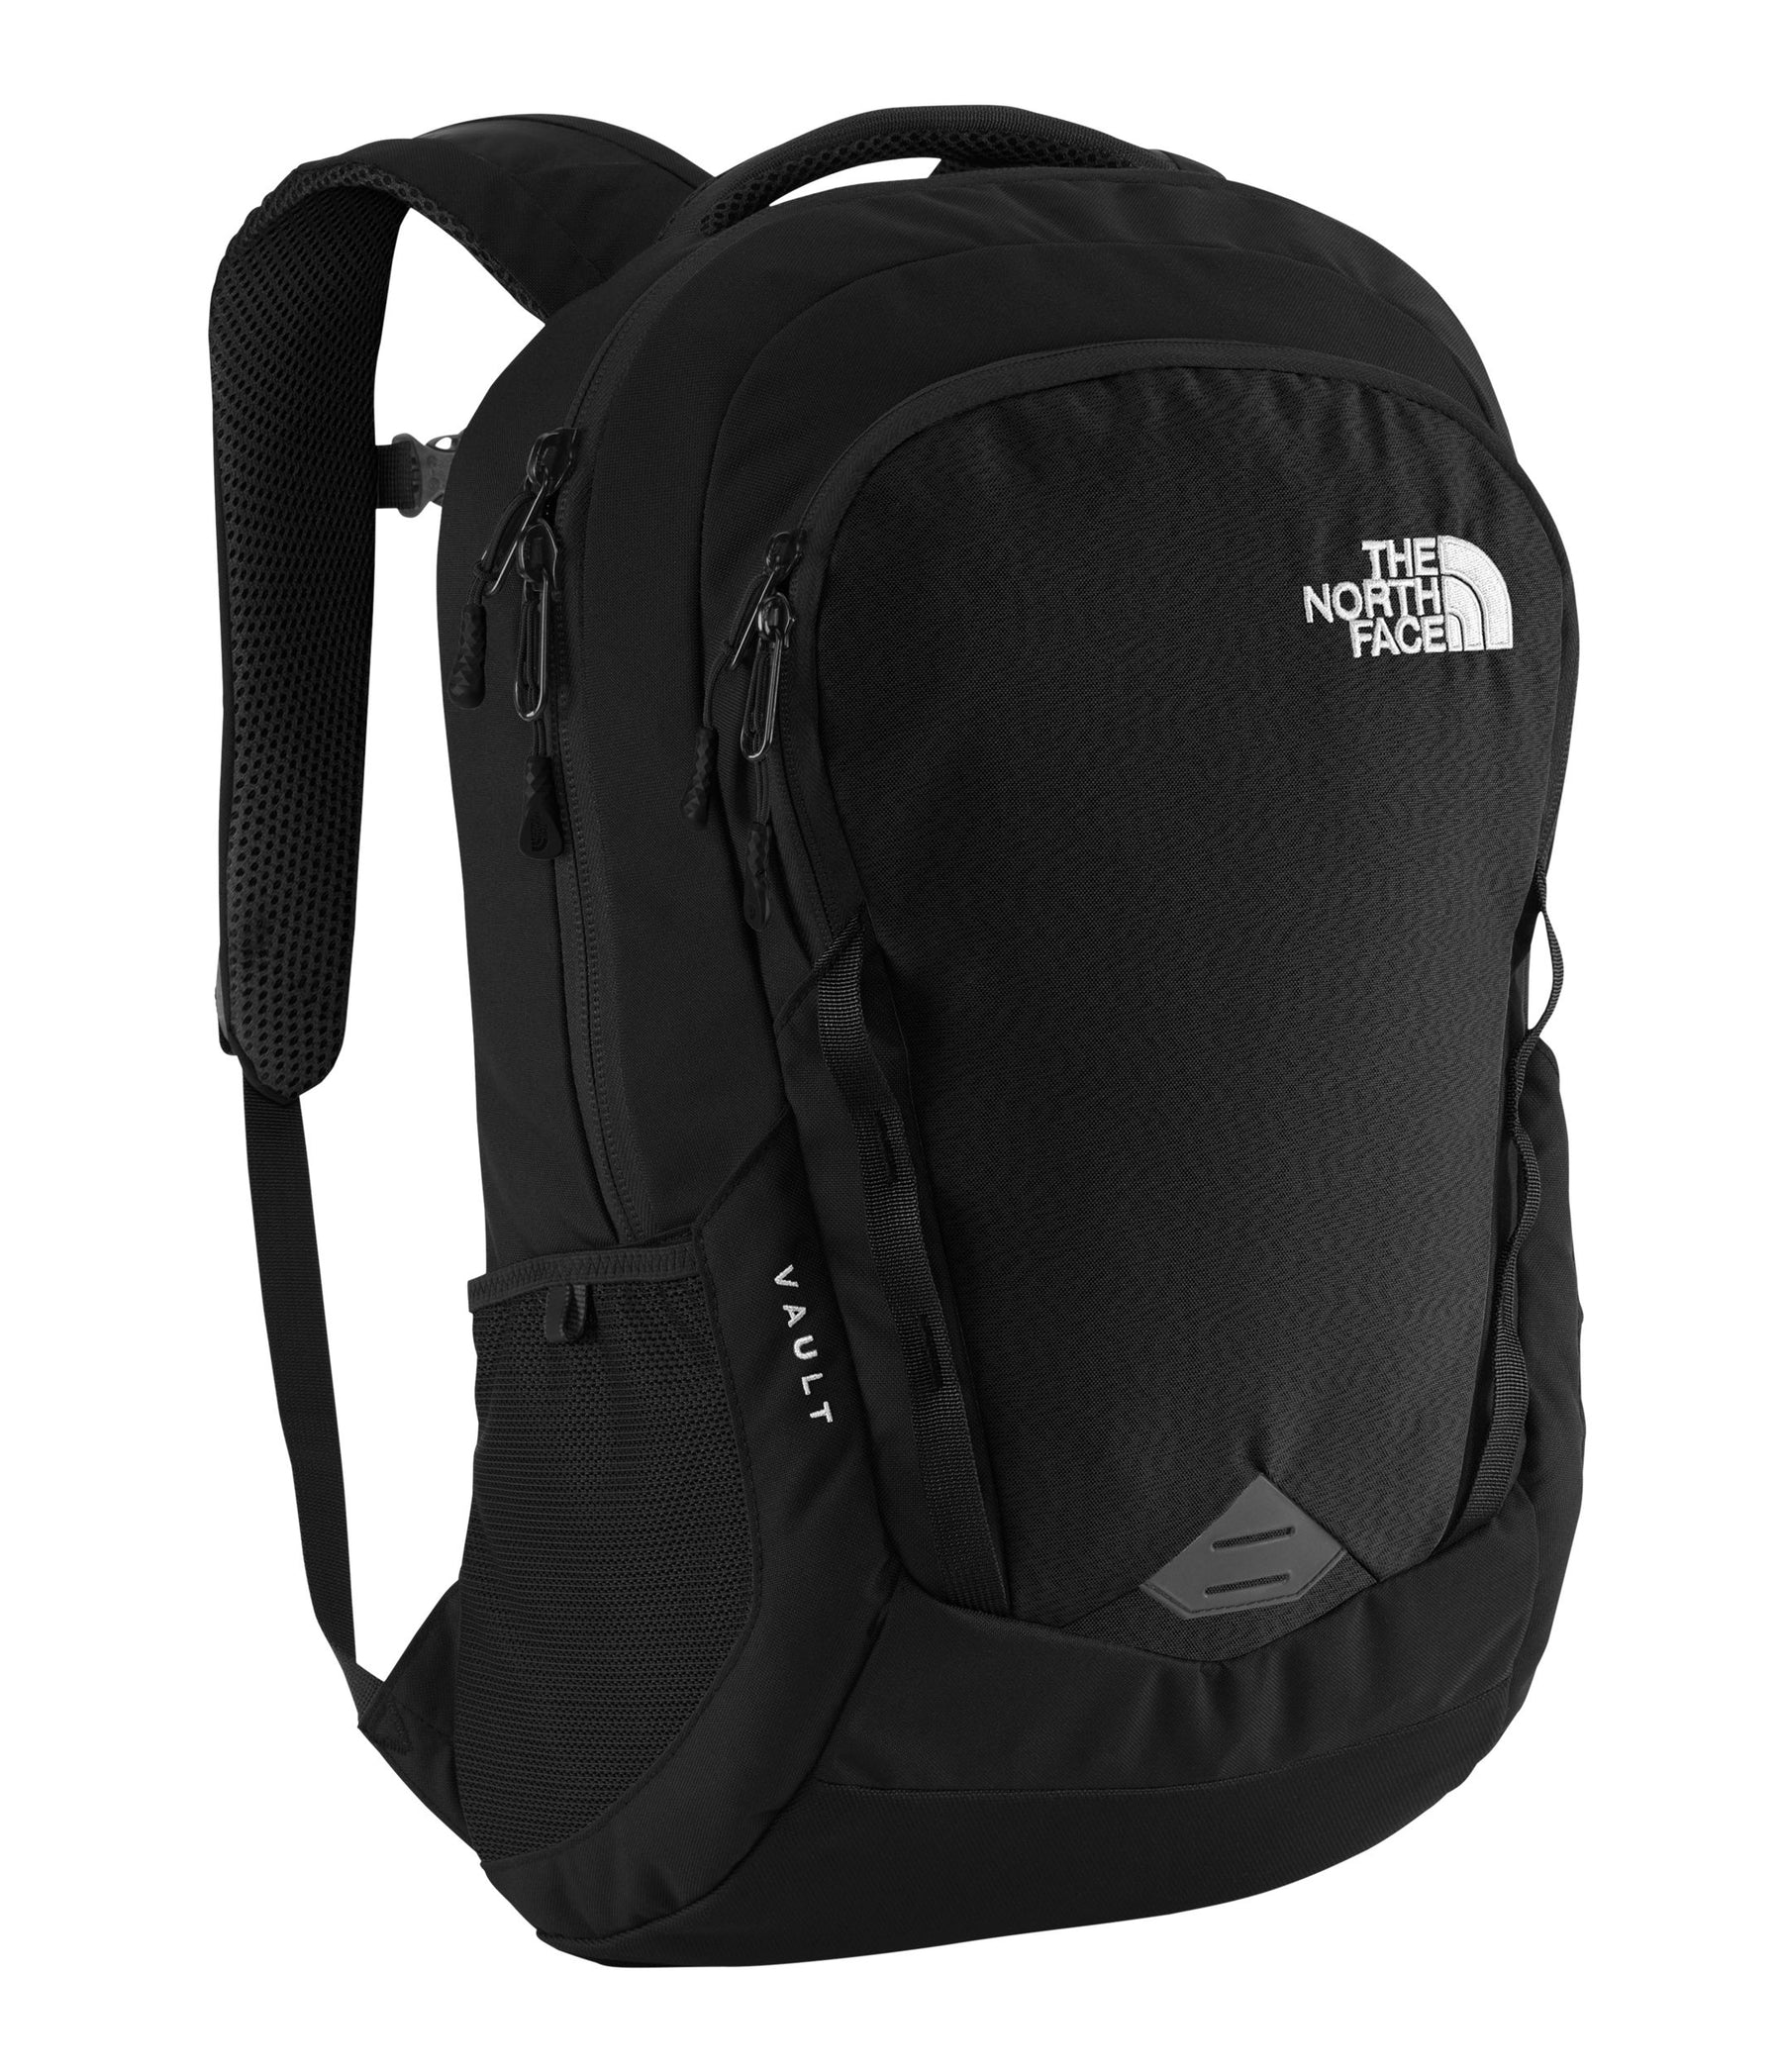 Backpacks Tagged "The North Face" - Outdoors Oriented